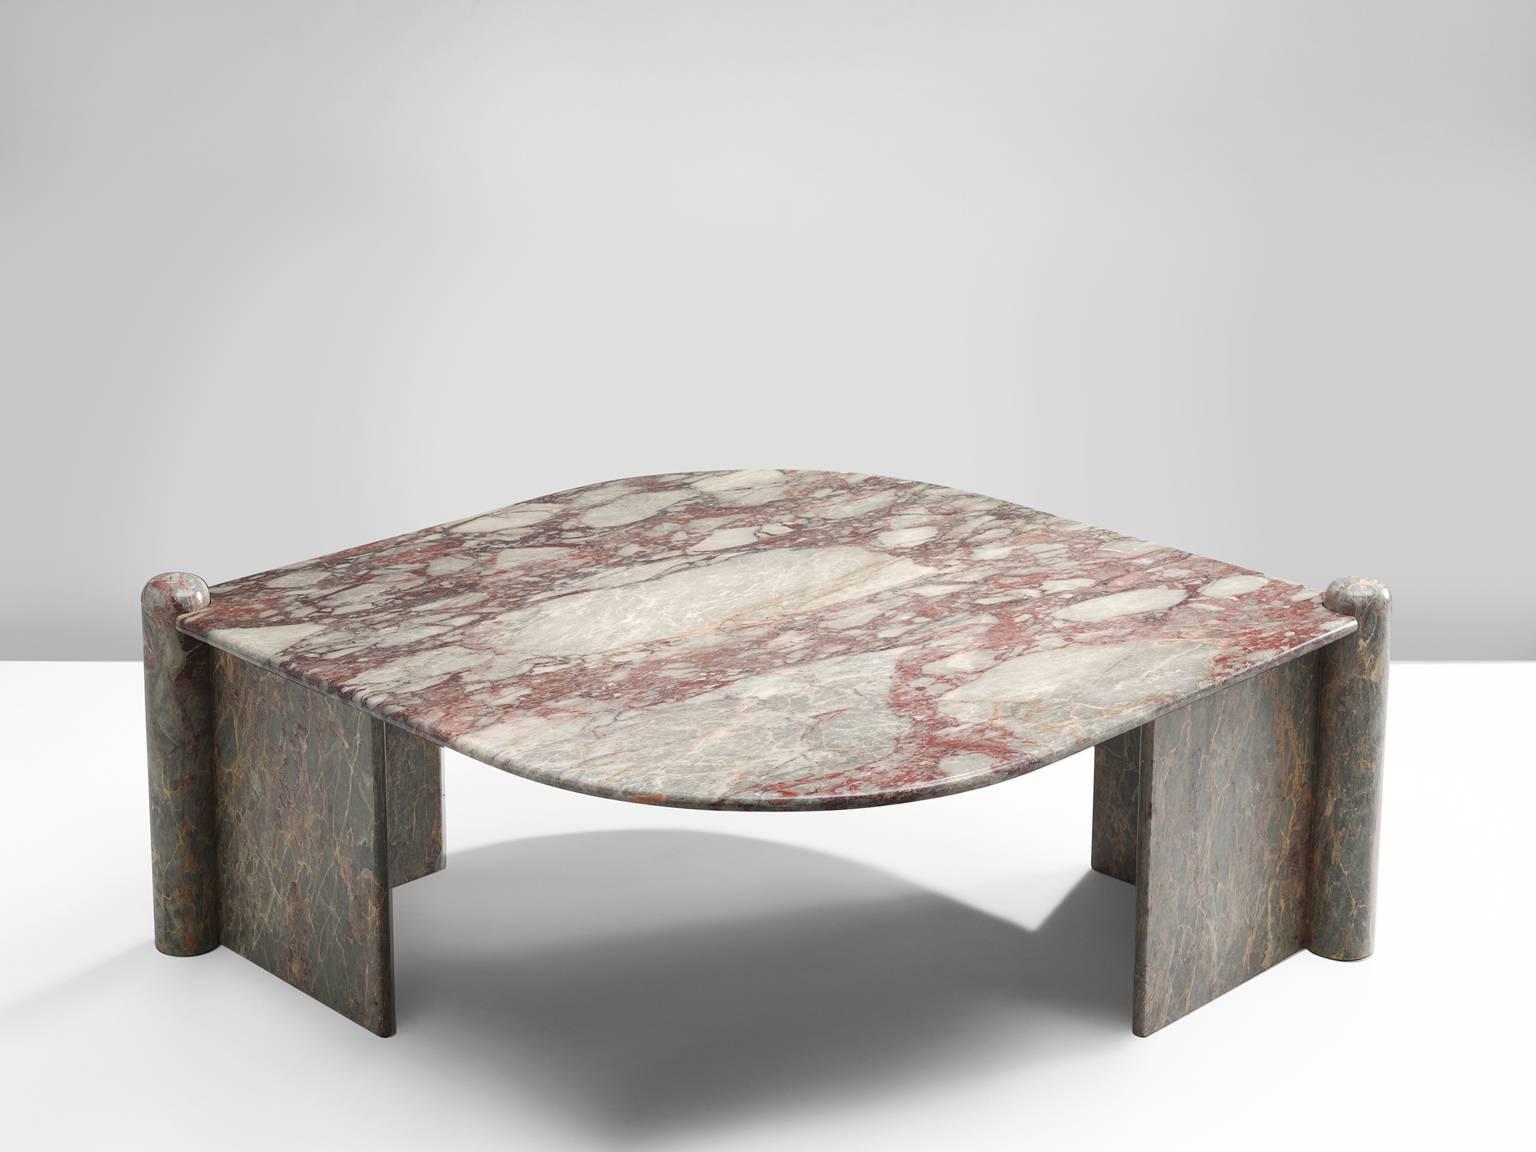 Cocktail table, marble, Italy, 1970s.

This sculptural table has an eye-shaped top and two open triangles that face one another. The circular ends of the base locks the top by means of gravity. The construction is so smoothly designed that